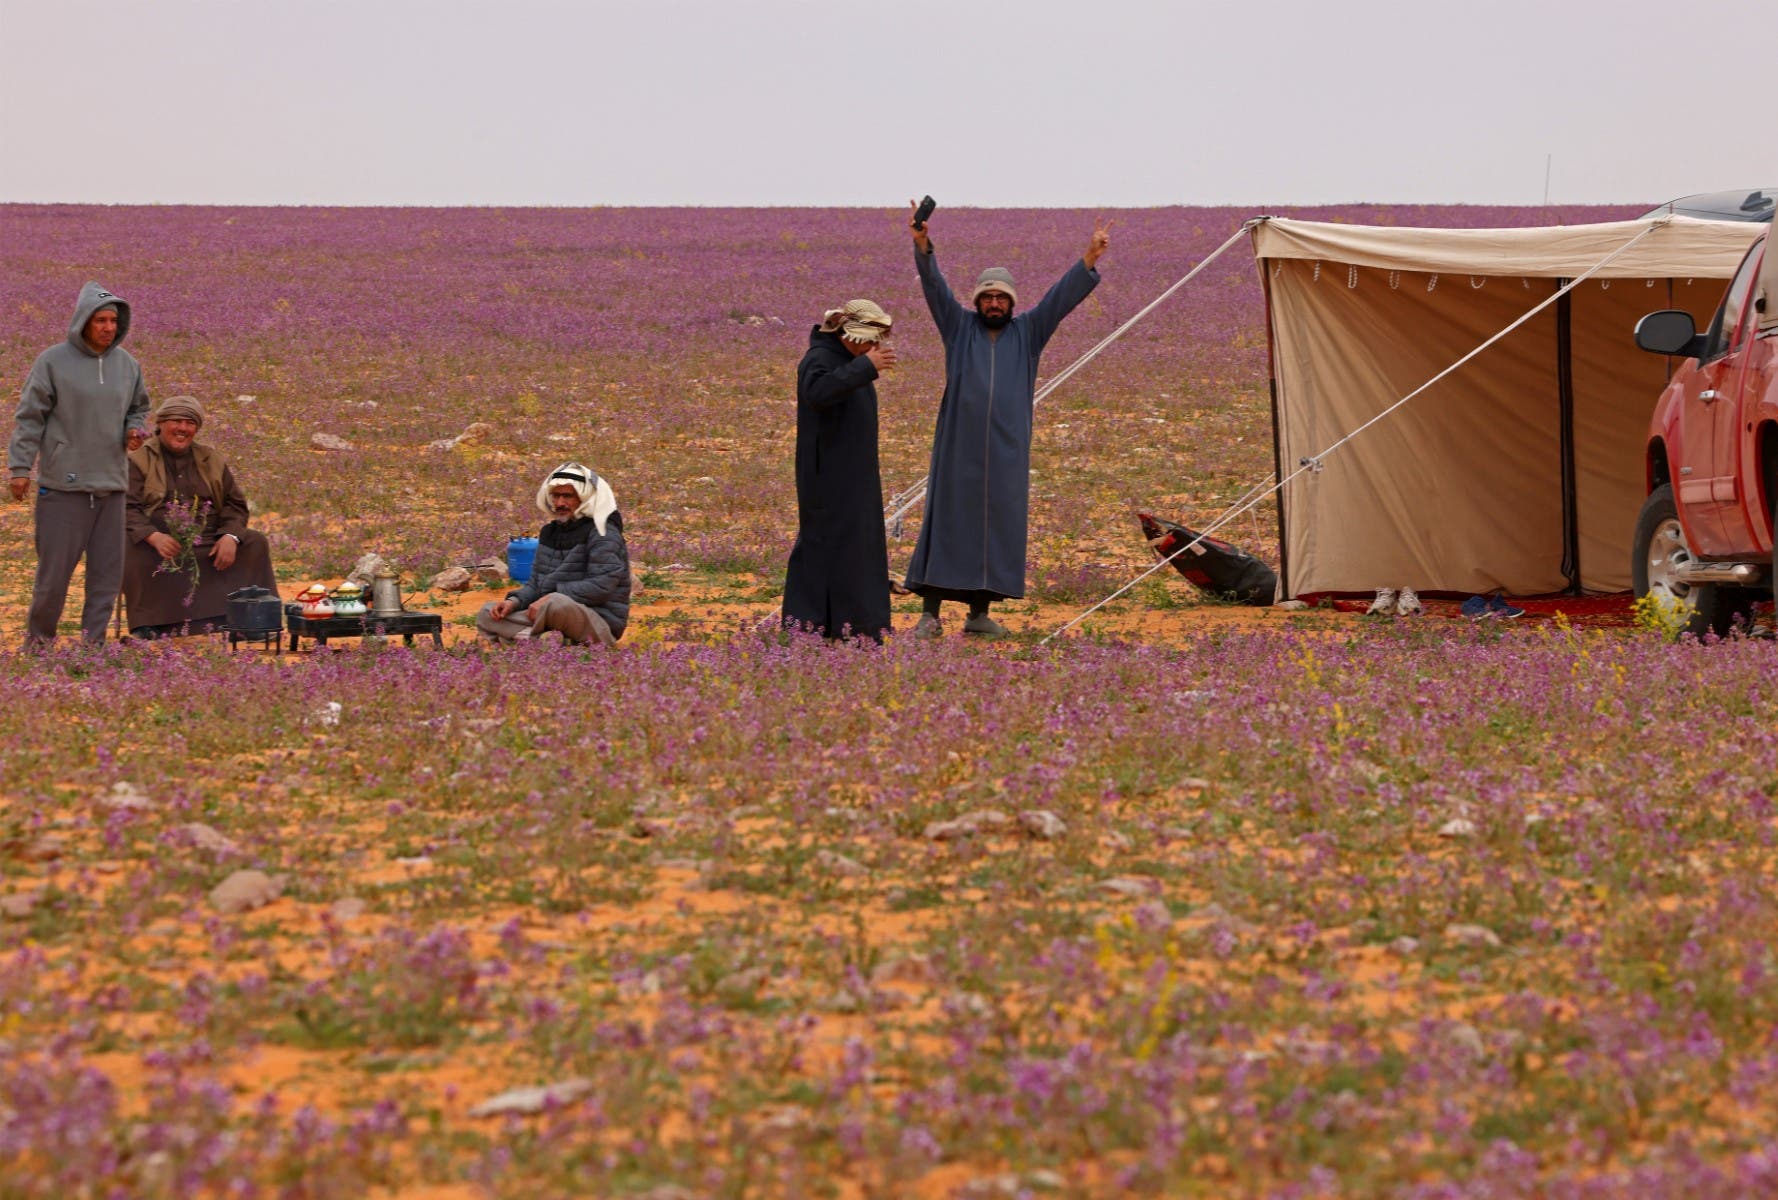 Pictures: Desert bloom carpets northern Saudi Arabia with purple 